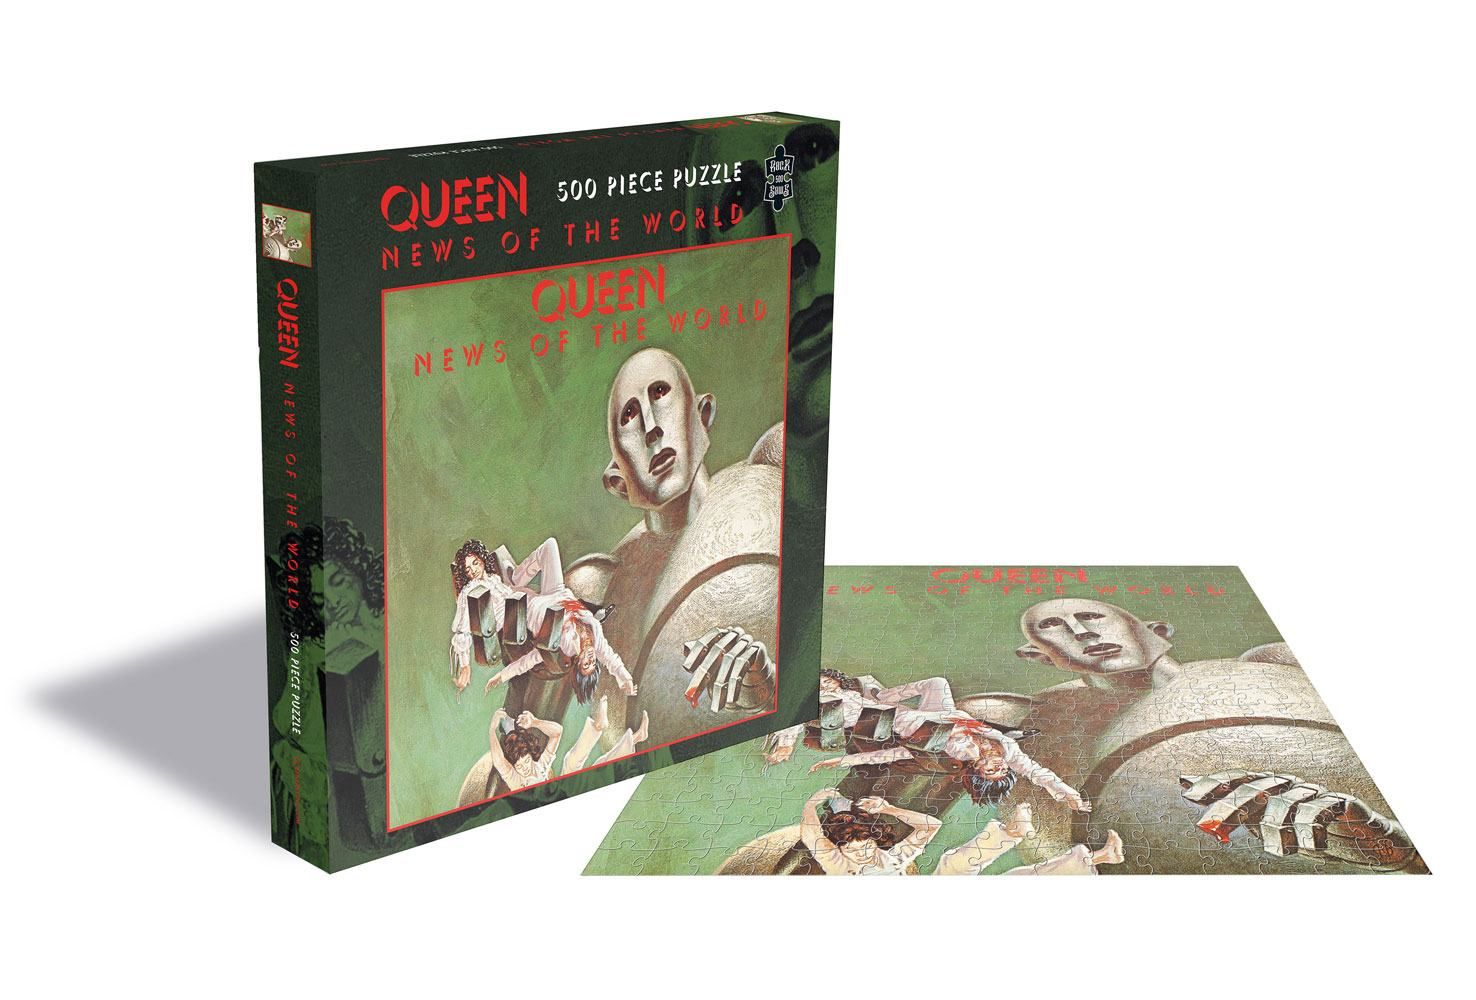 Queen Puzzle News of the World PHD Merchandise